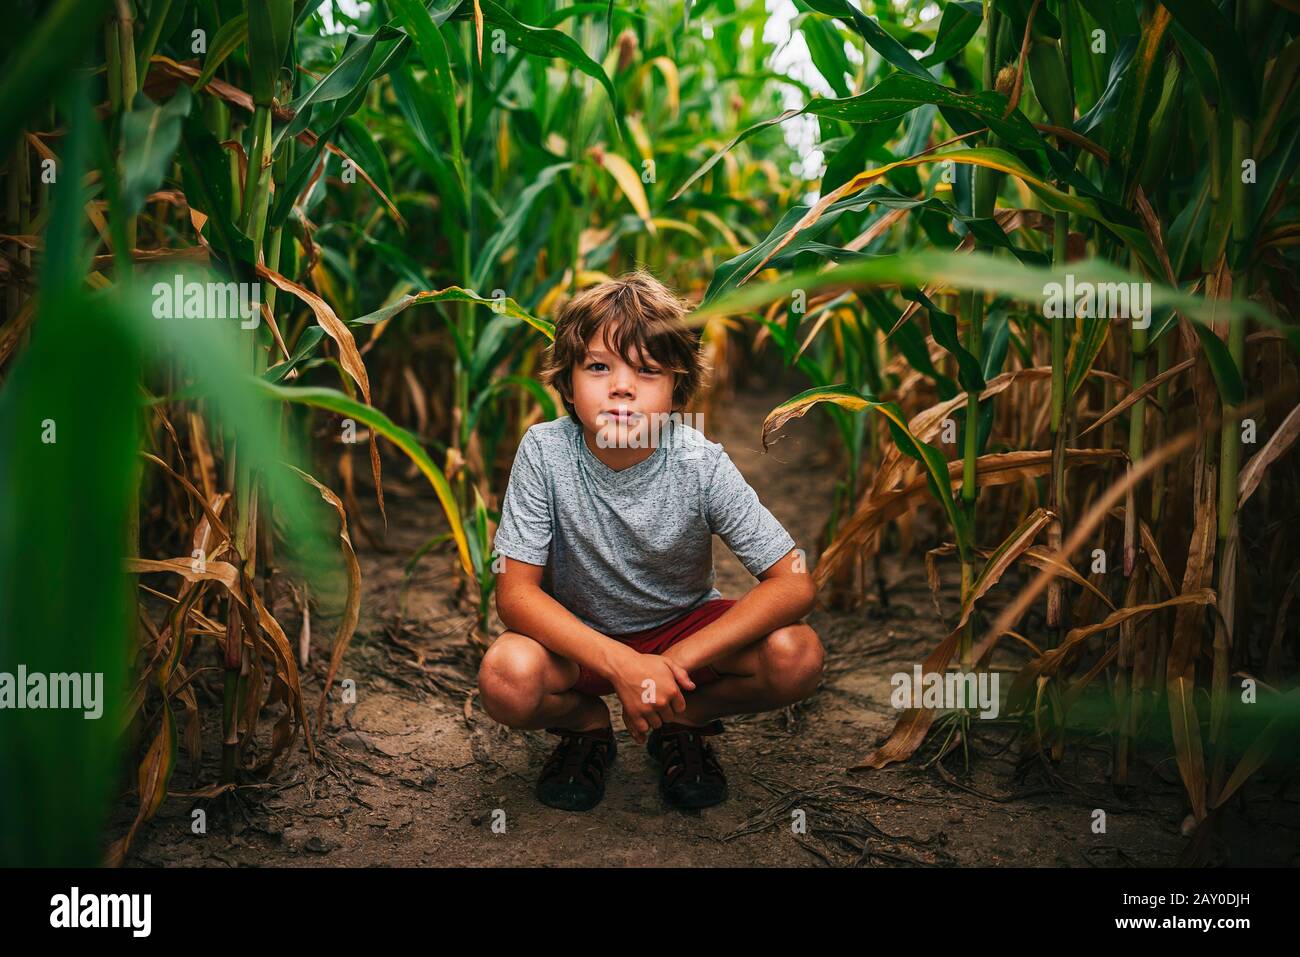 Portrait of a boy crouching in a corn field, USA Stock Photo